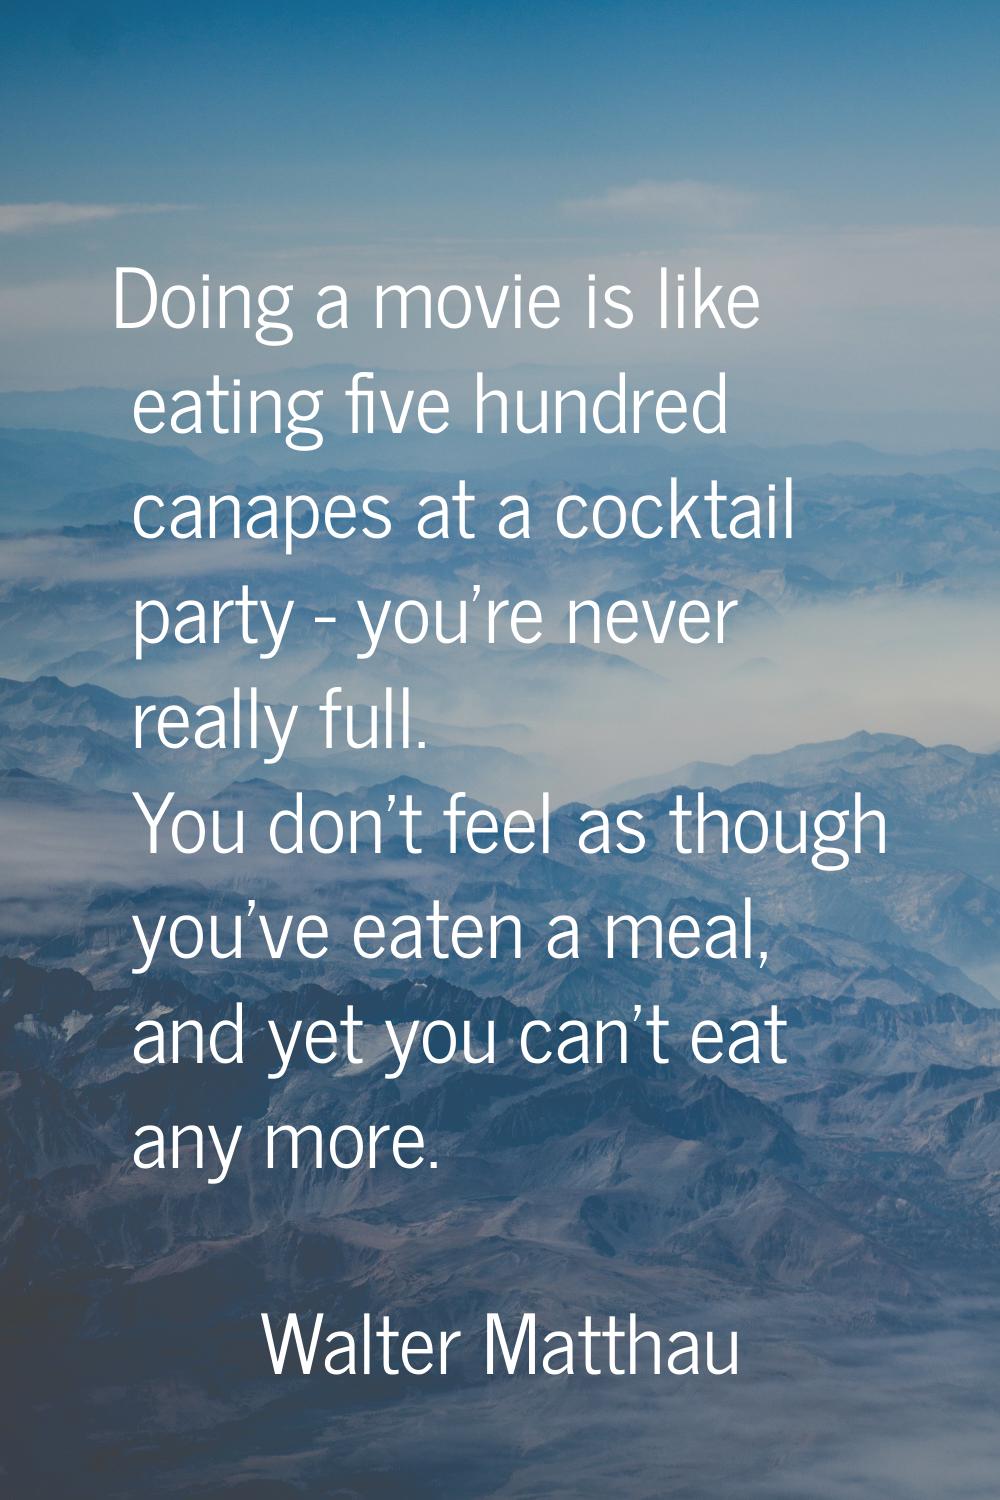 Doing a movie is like eating five hundred canapes at a cocktail party - you're never really full. Y